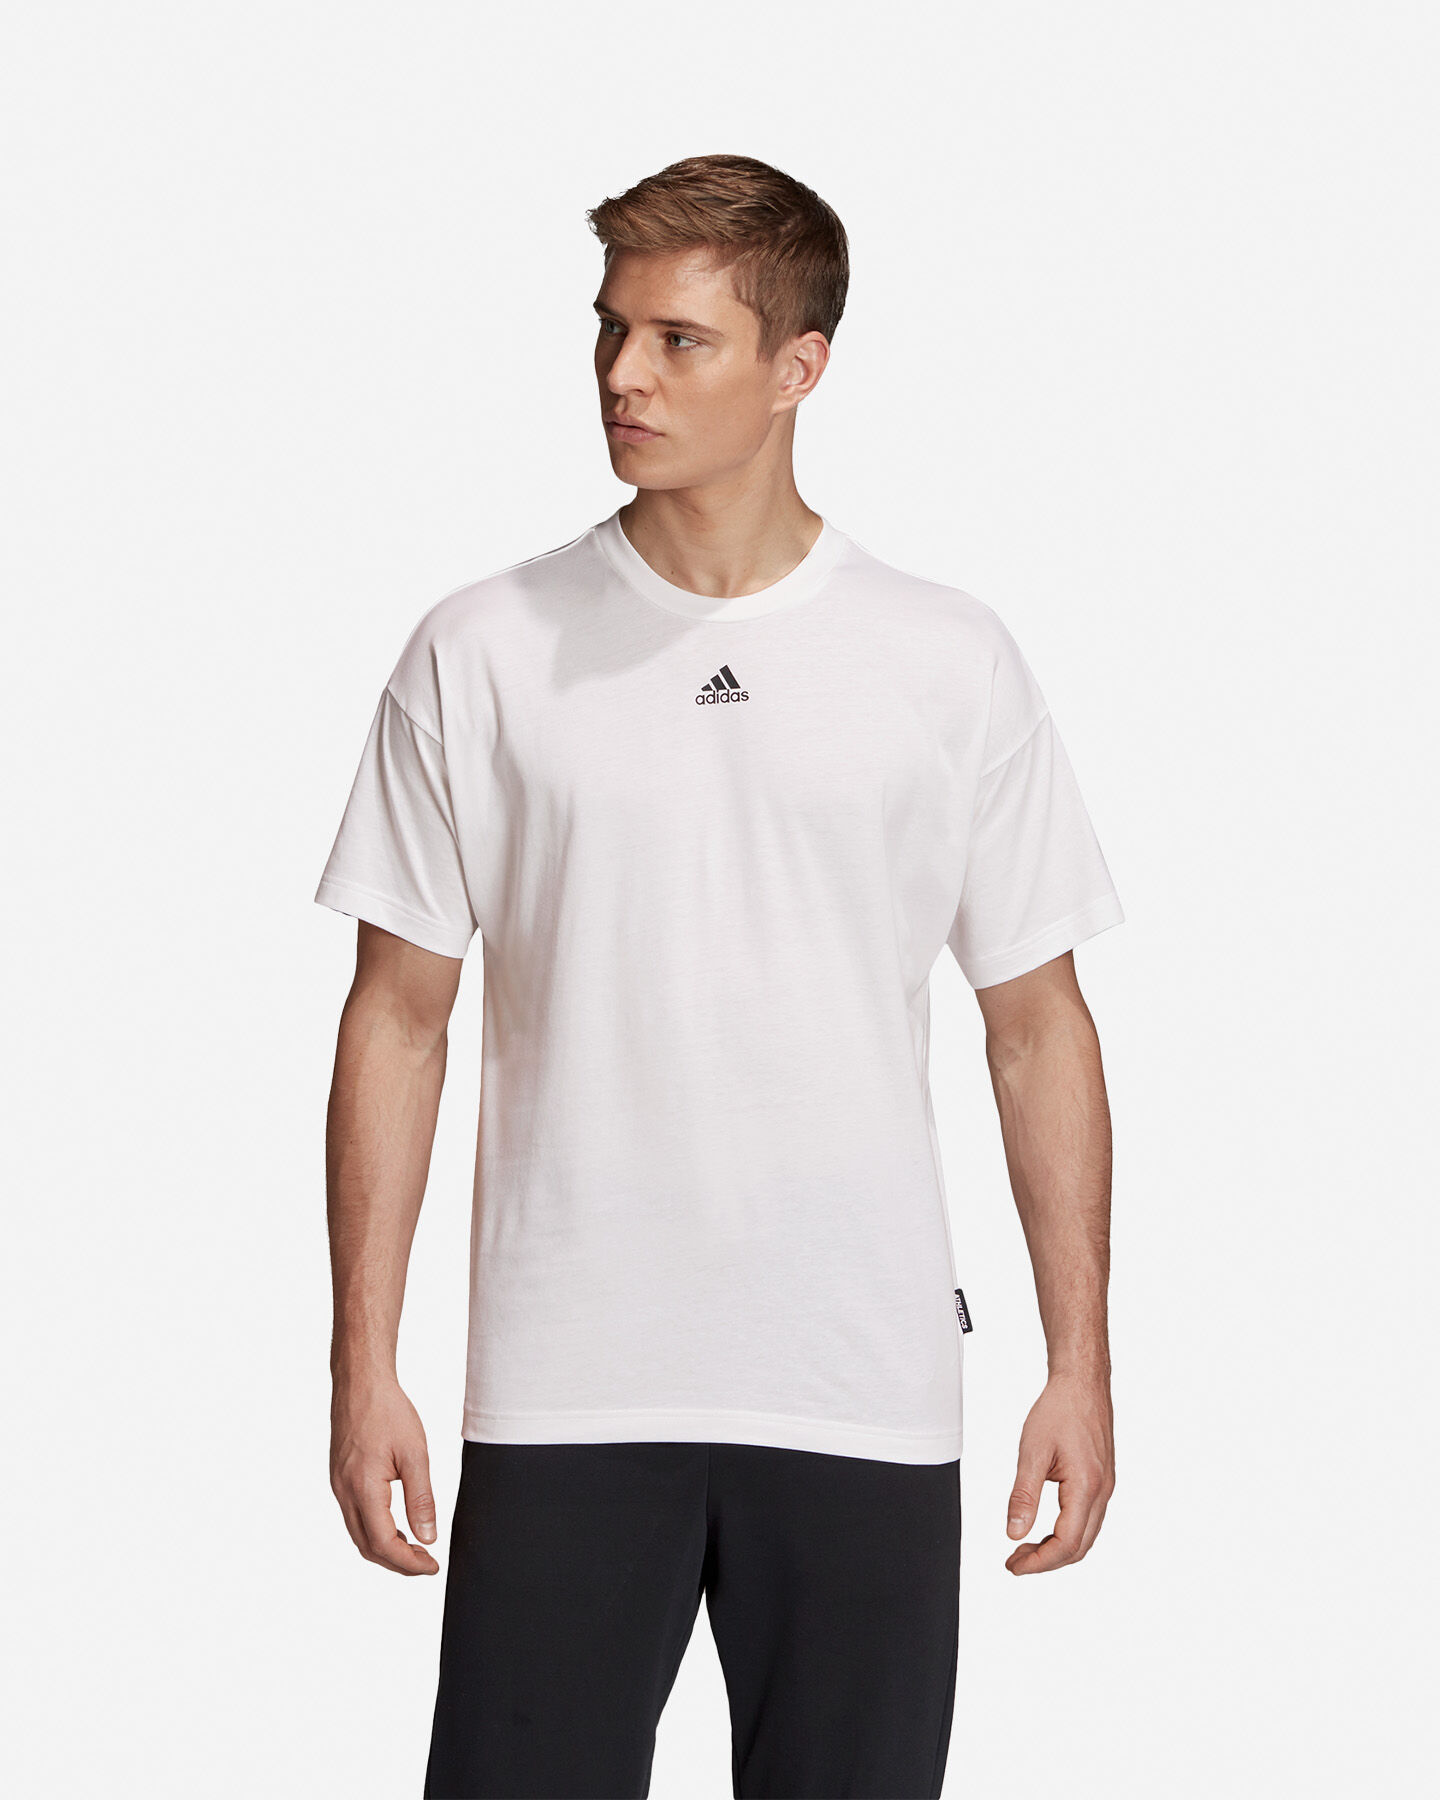  T-Shirt ADIDAS MUST HAVE 3 STRIPES M S5216653|UNI|XS scatto 2